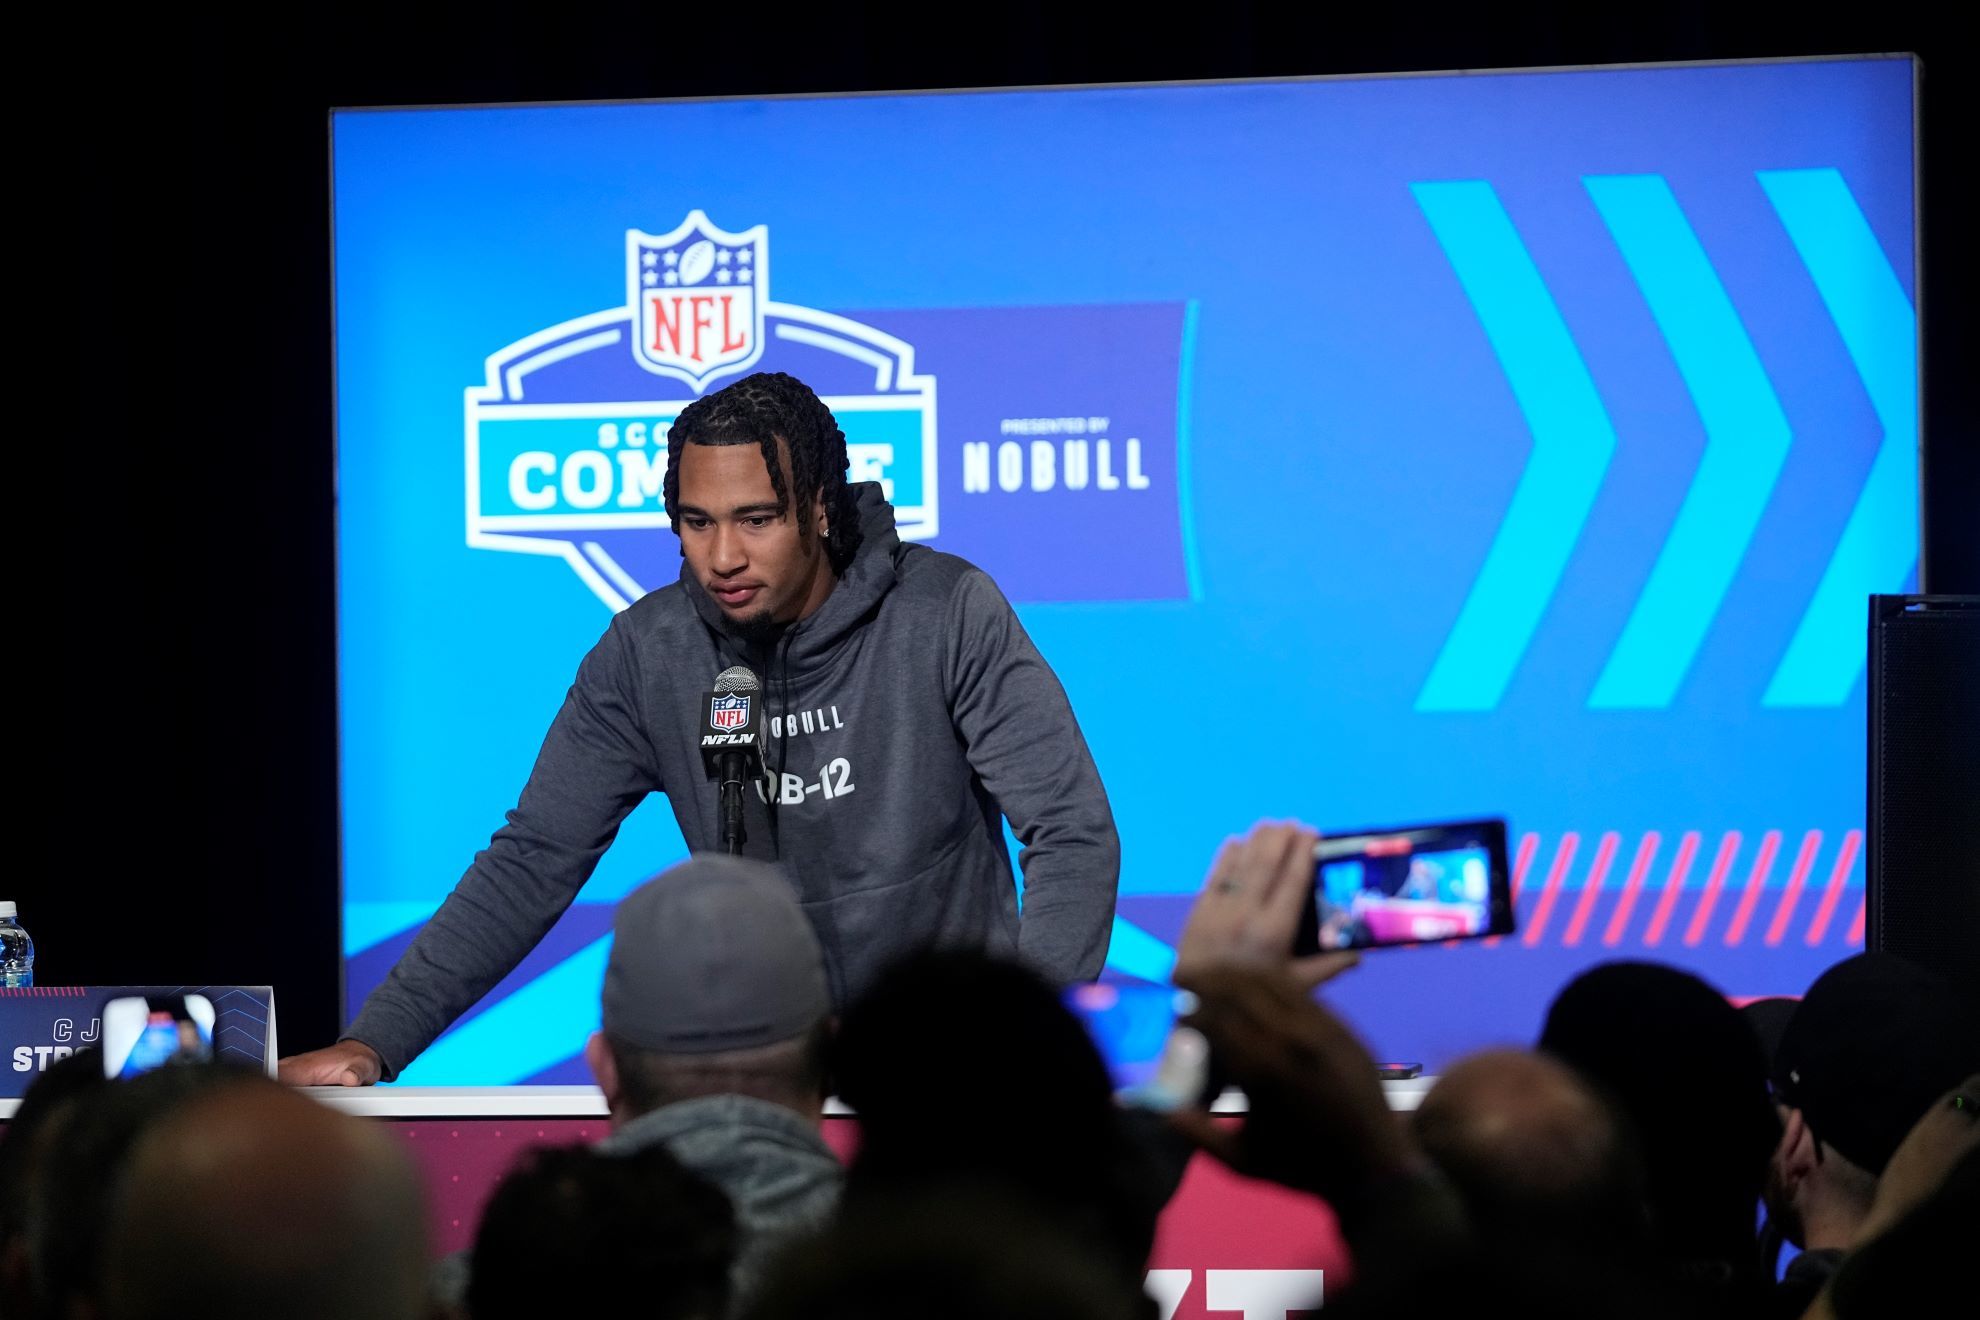 Ohio State quarterback CJ Stroud speaks during a news conference at the NFL football scouting combine in Indianapolis.